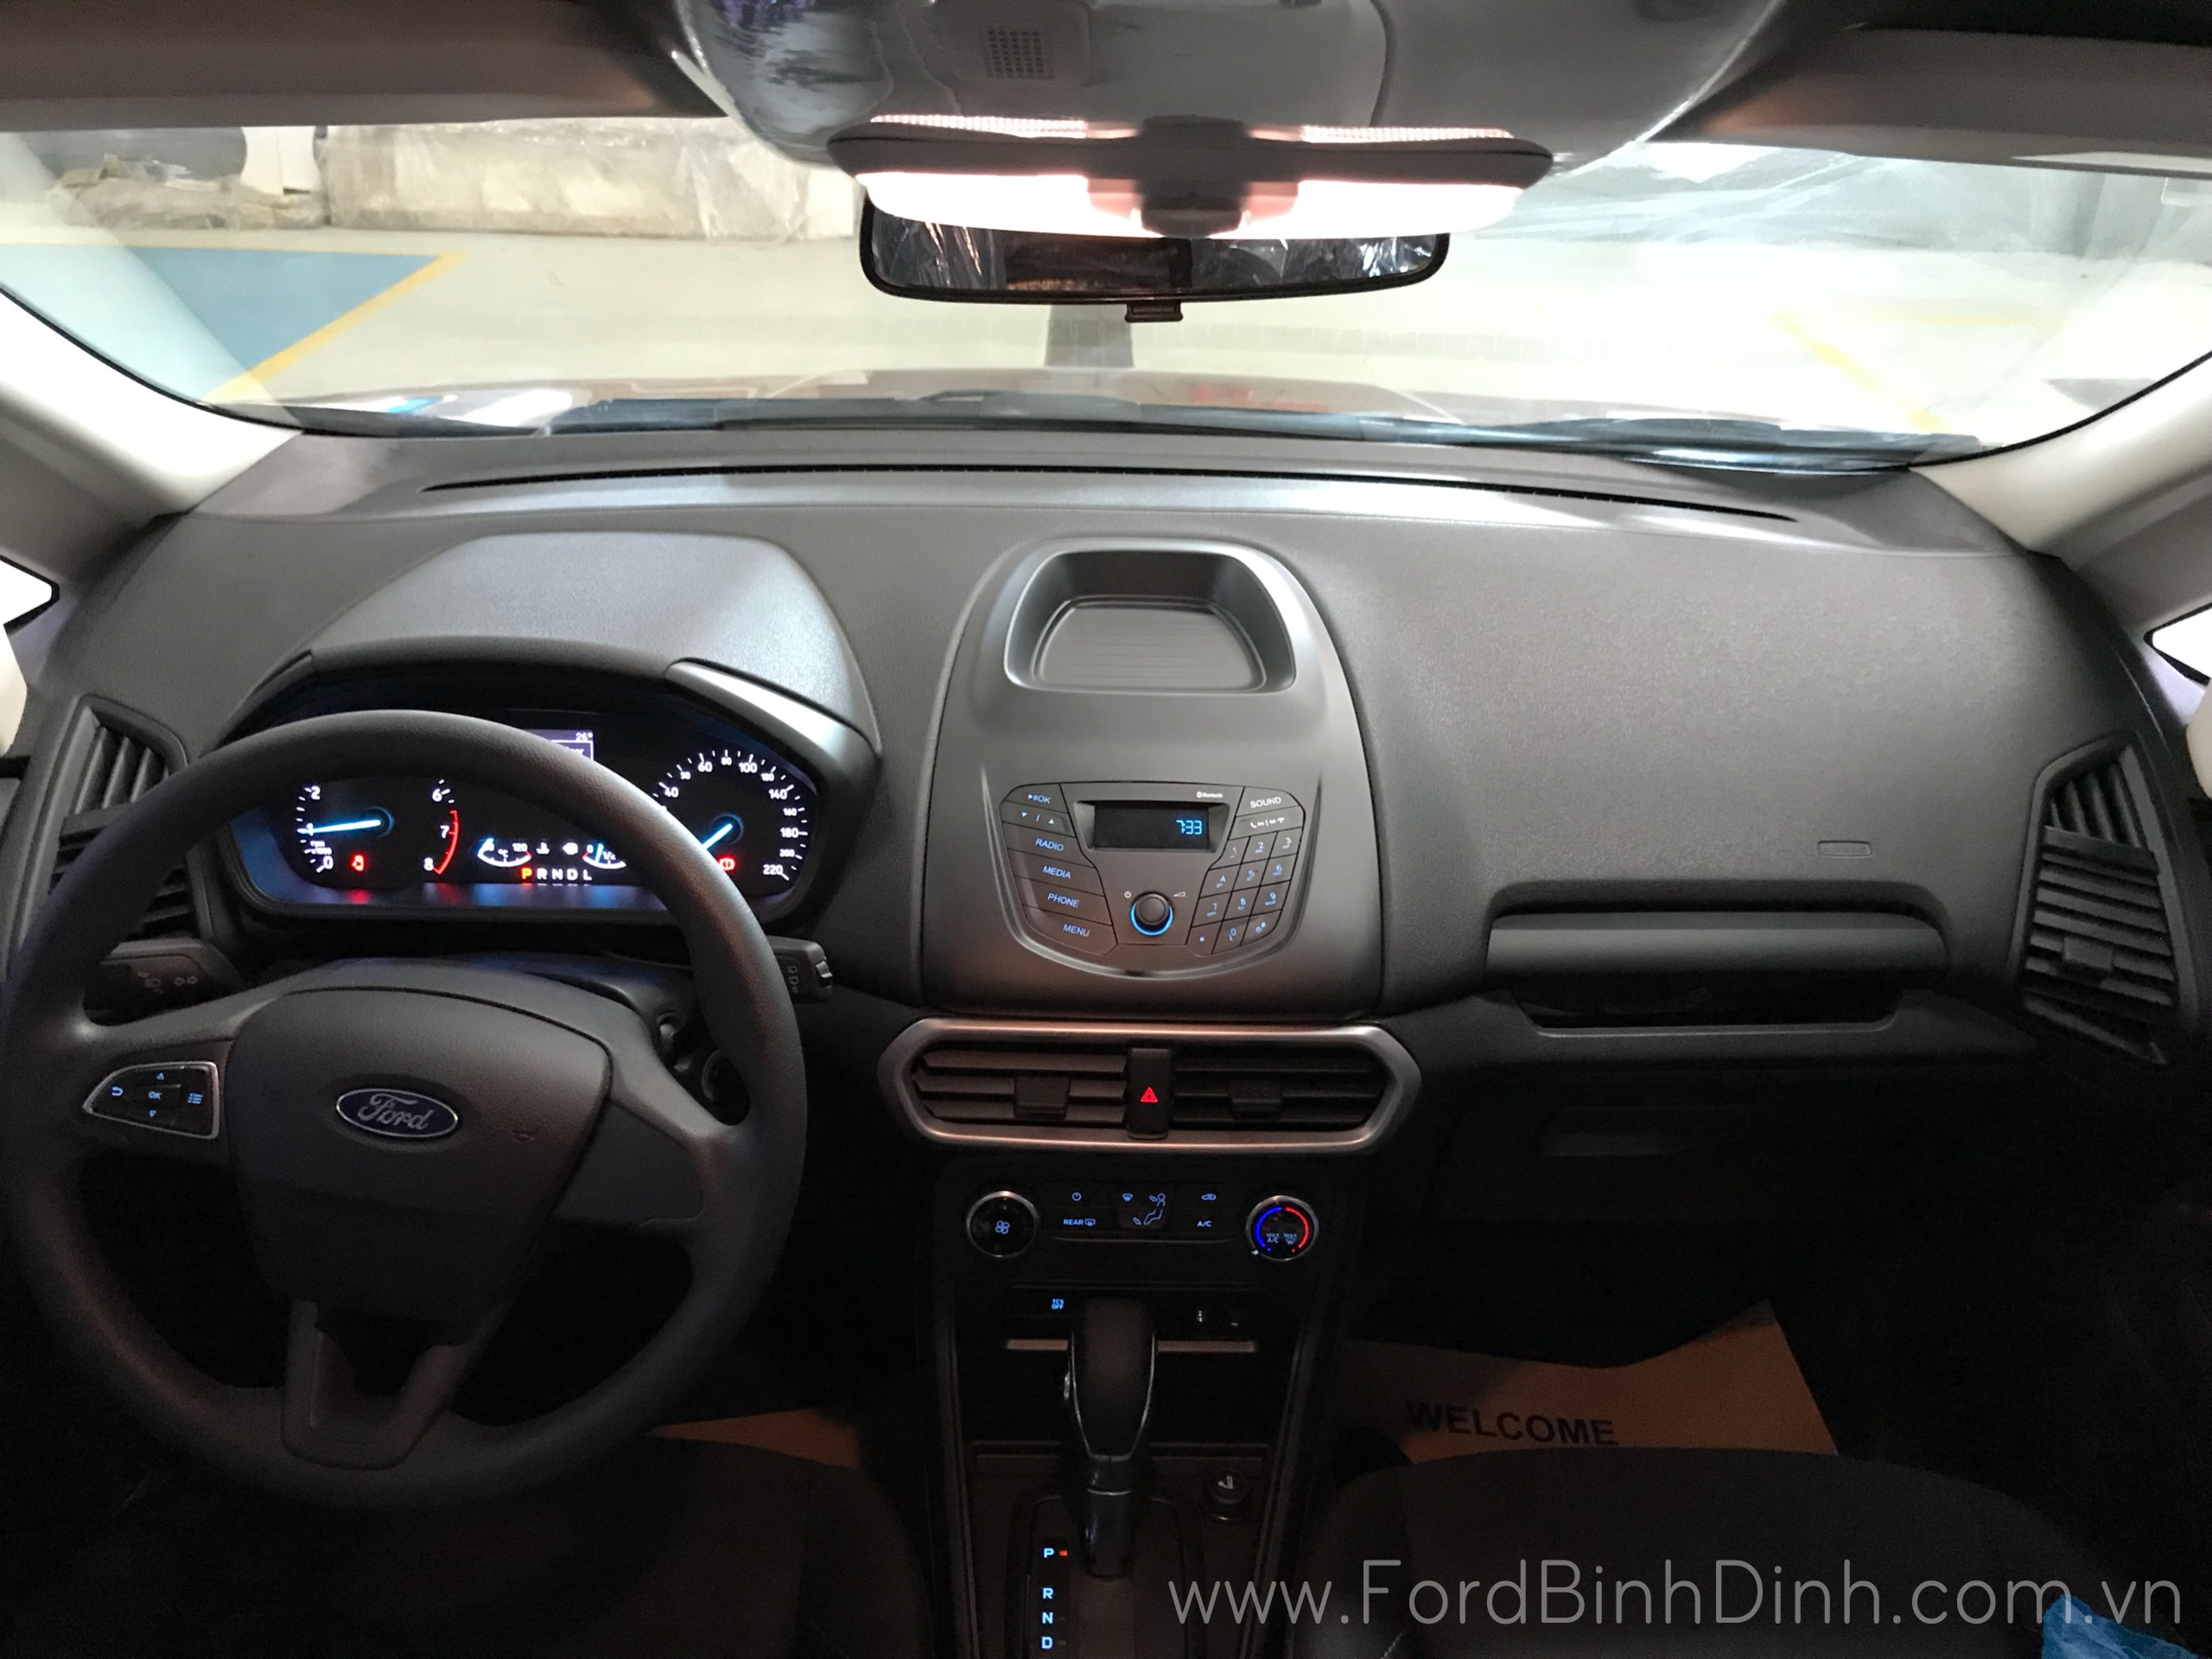 ecosport-1.5l-ambiente-at-ford-binh-dinh-com-vn-7